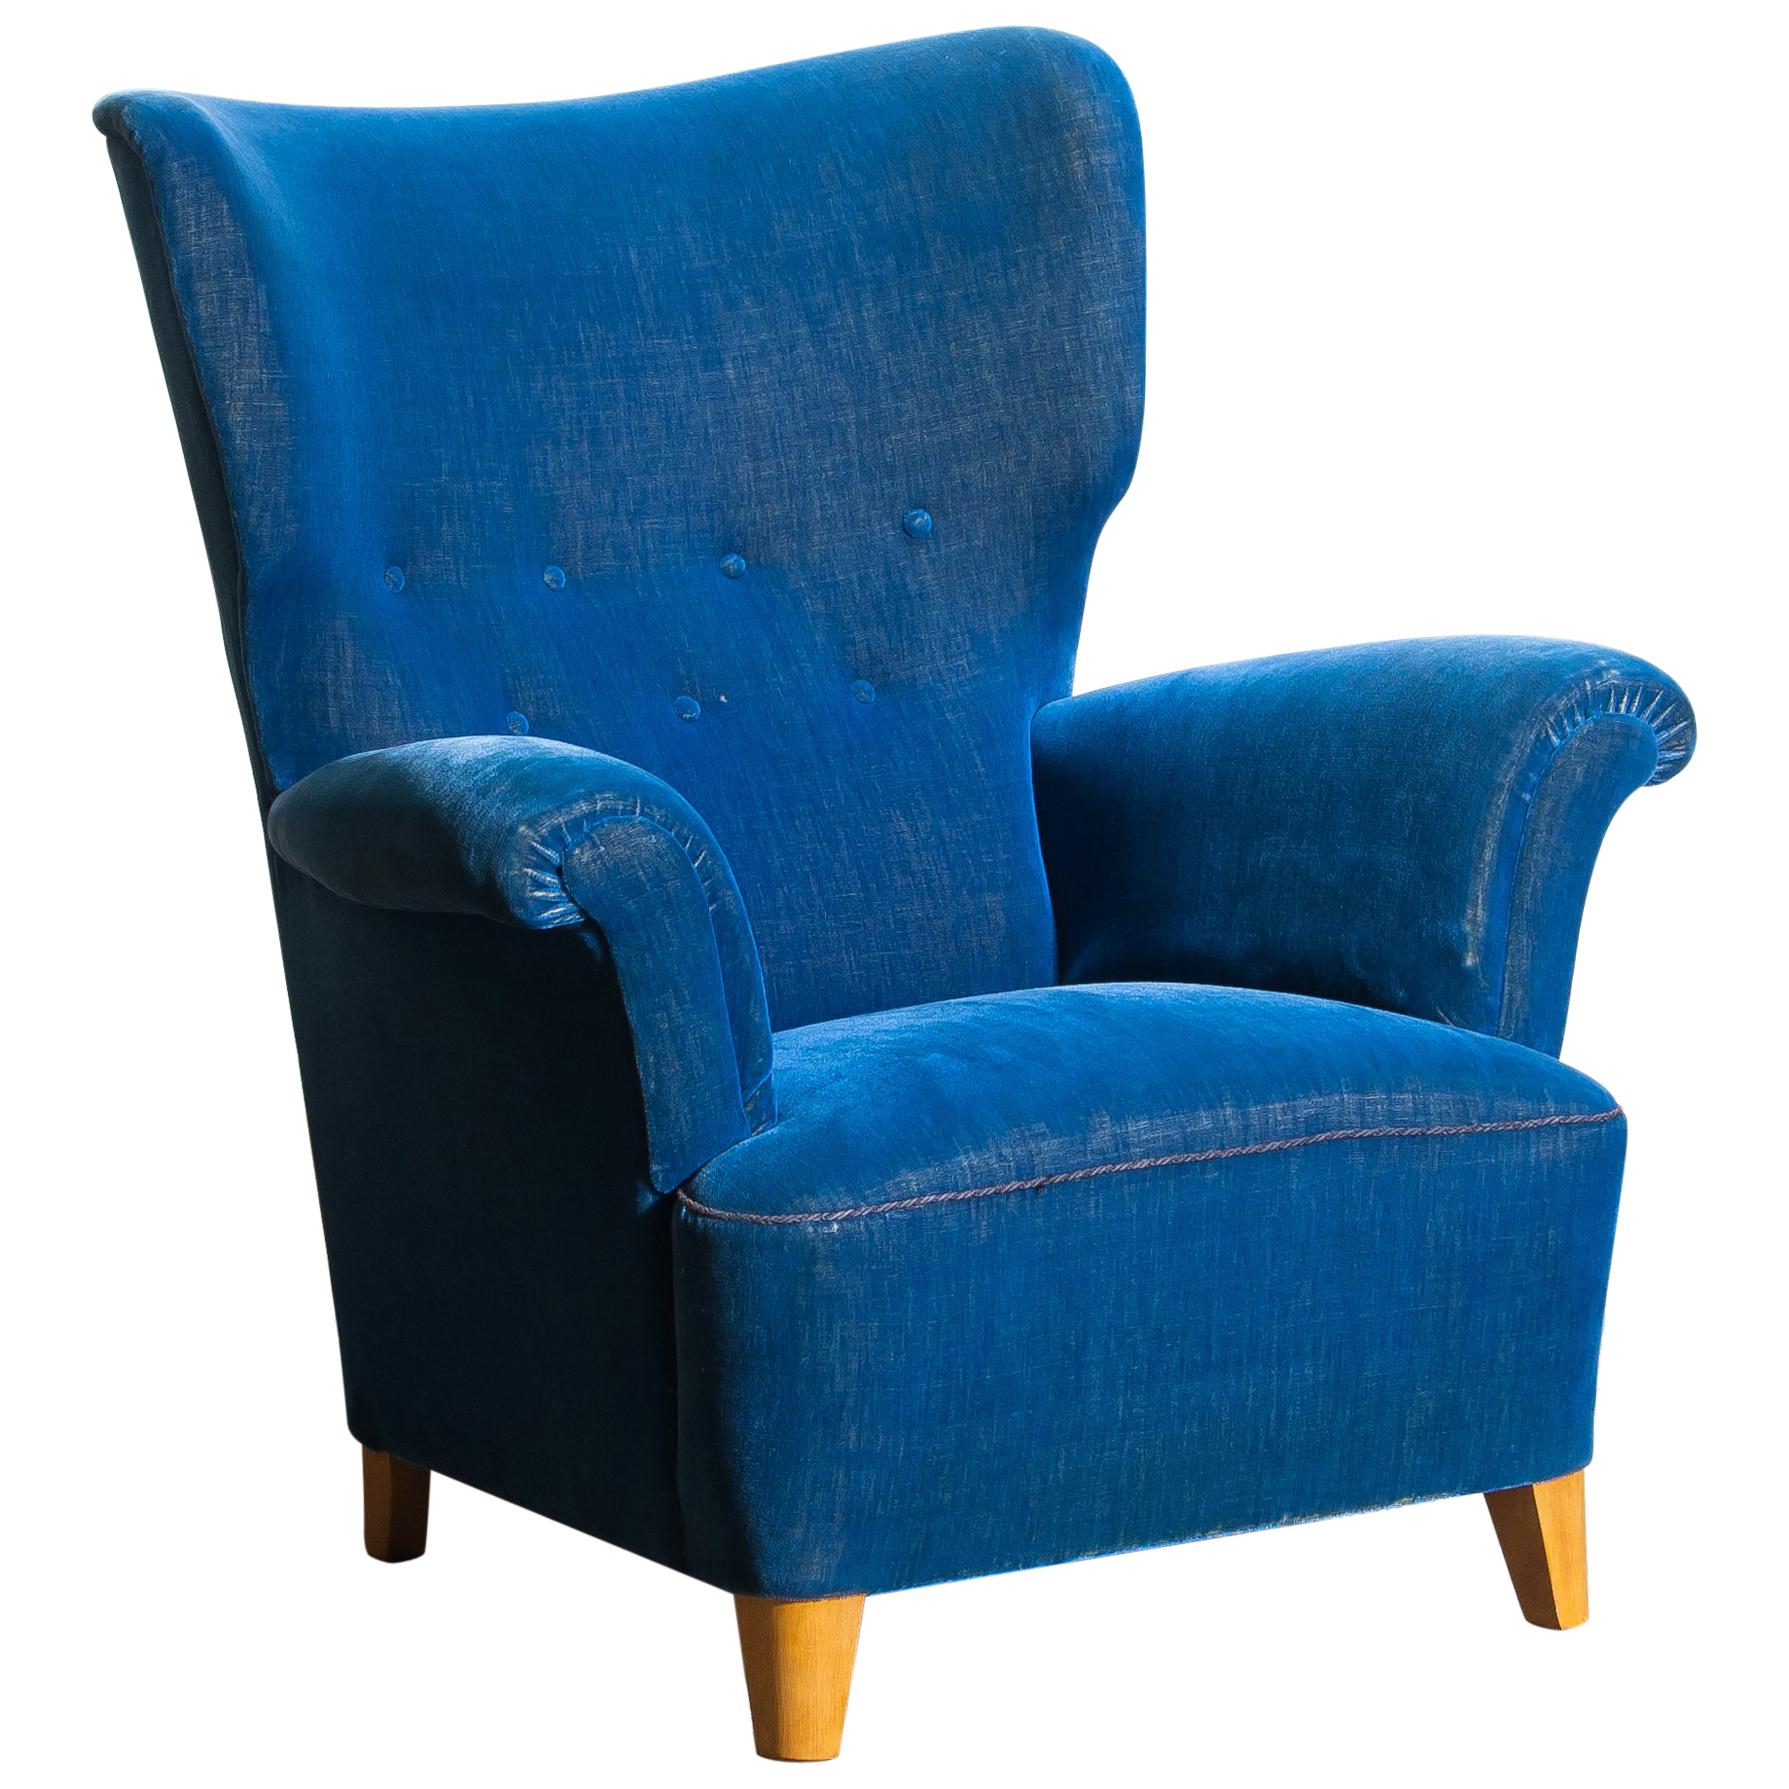 Beautiful robust 1930-1940 wingback chair in royal blue velvet and beech from Sweden, 1940s. This wingback chair is typical for early midcentury Scandinavian design.
The somewhat thin velvet gives the chair a beautiful character. Padding/springs